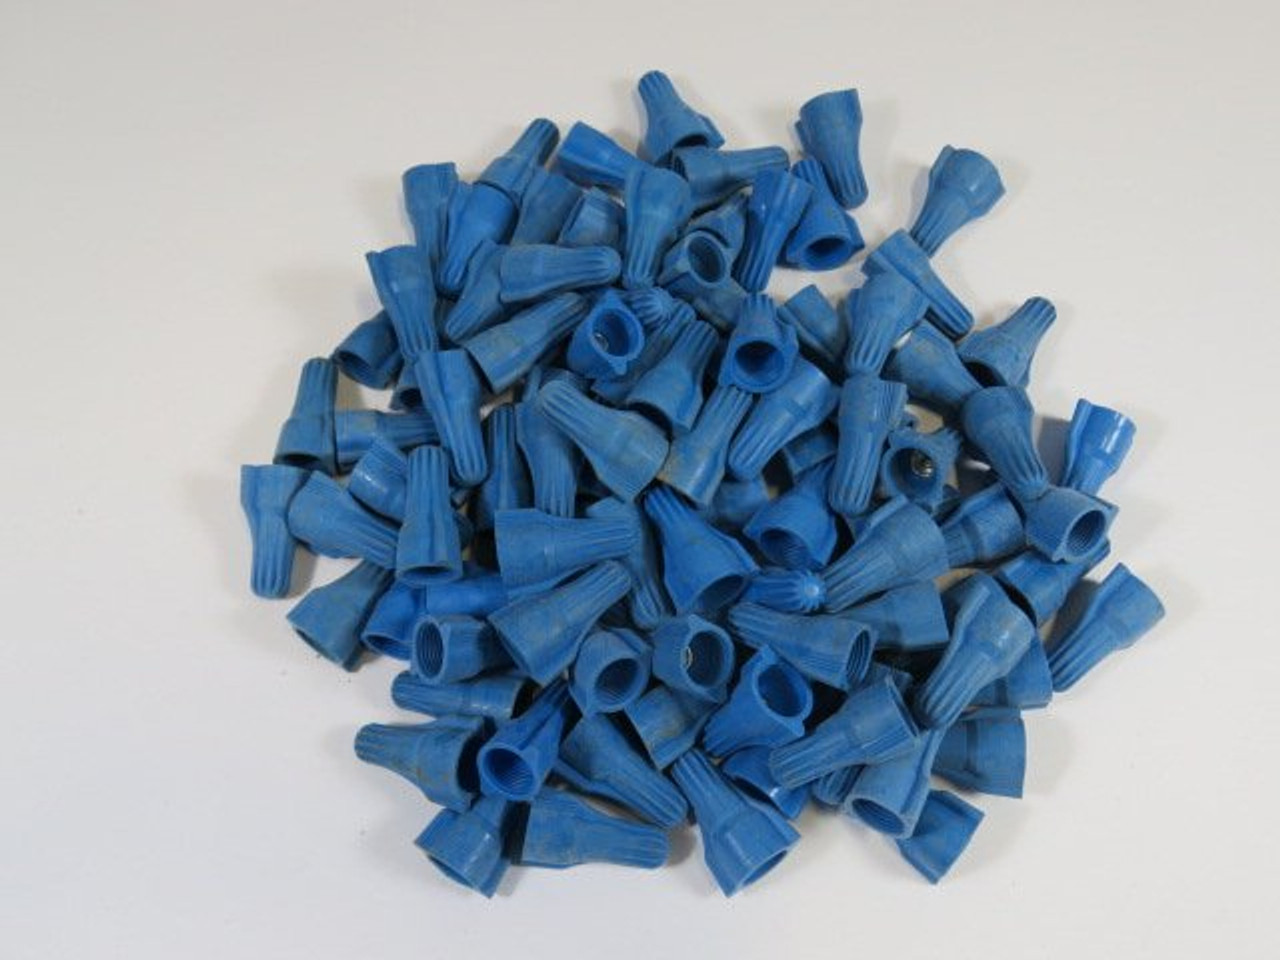 Ideal 30-207R Blue Can-Twist Wire Connector Lot of 164 USED